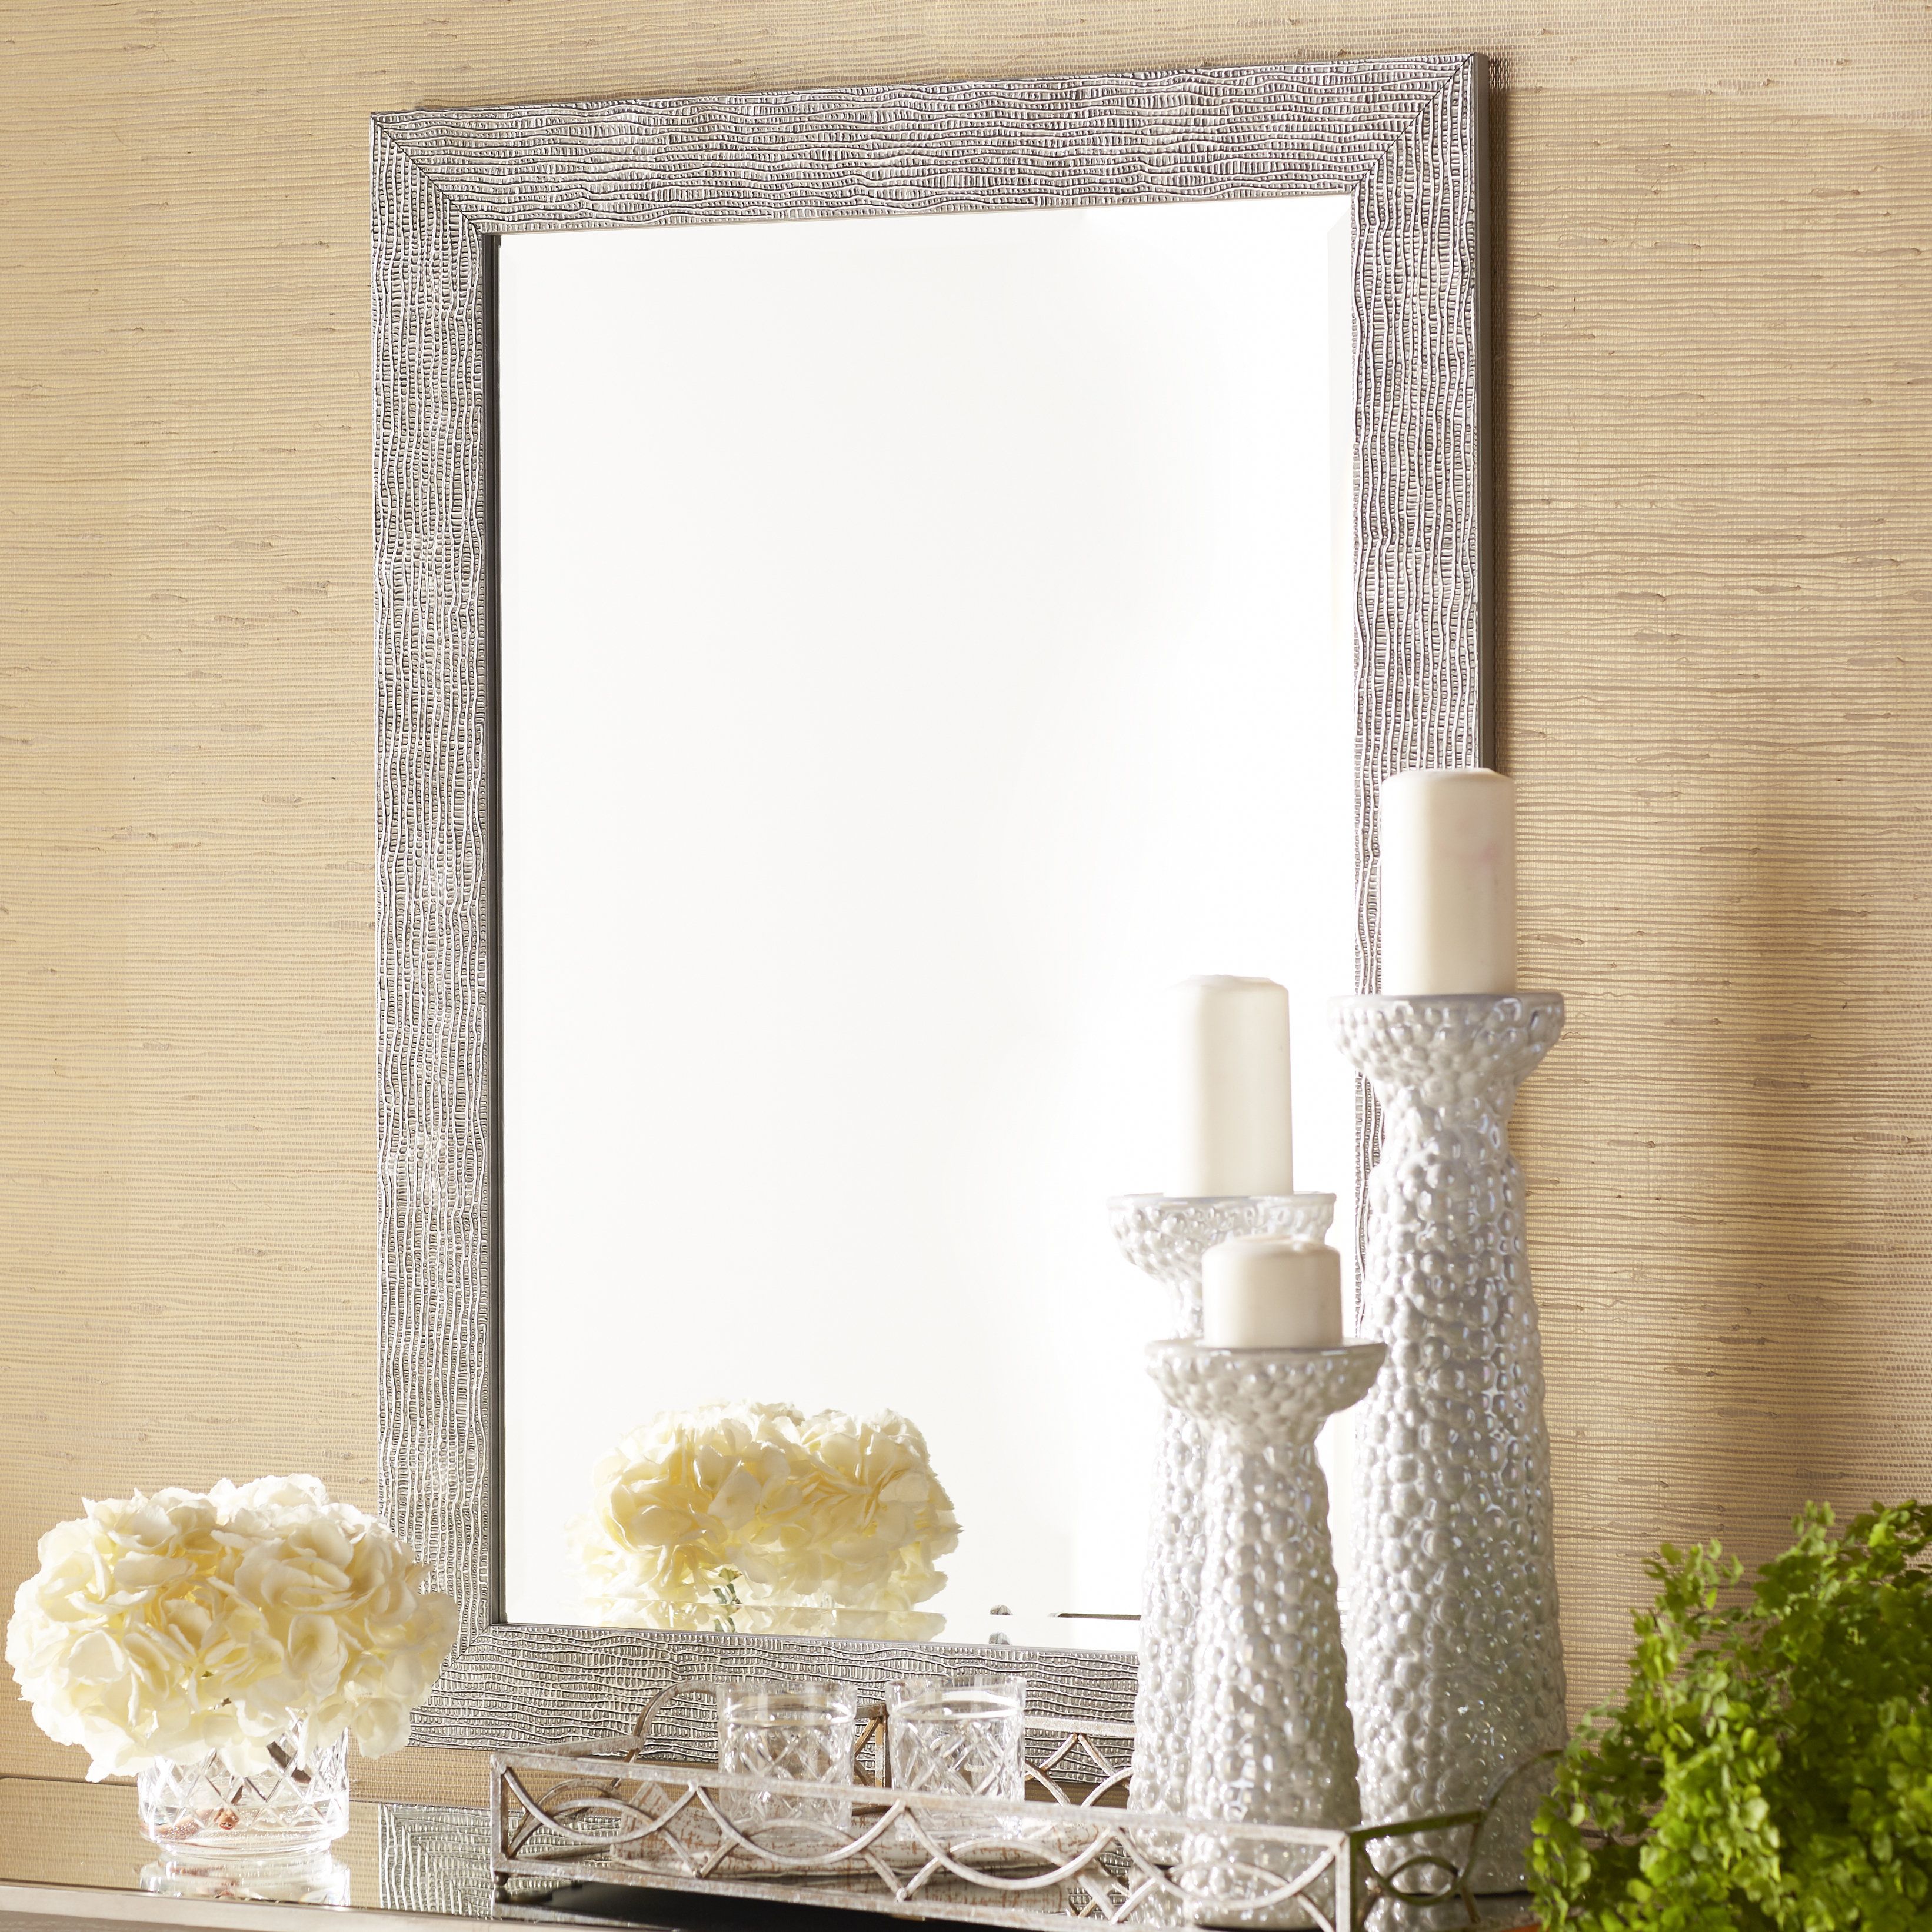 6 Foot Mirror | Wayfair In Owens Accent Mirrors (View 12 of 20)